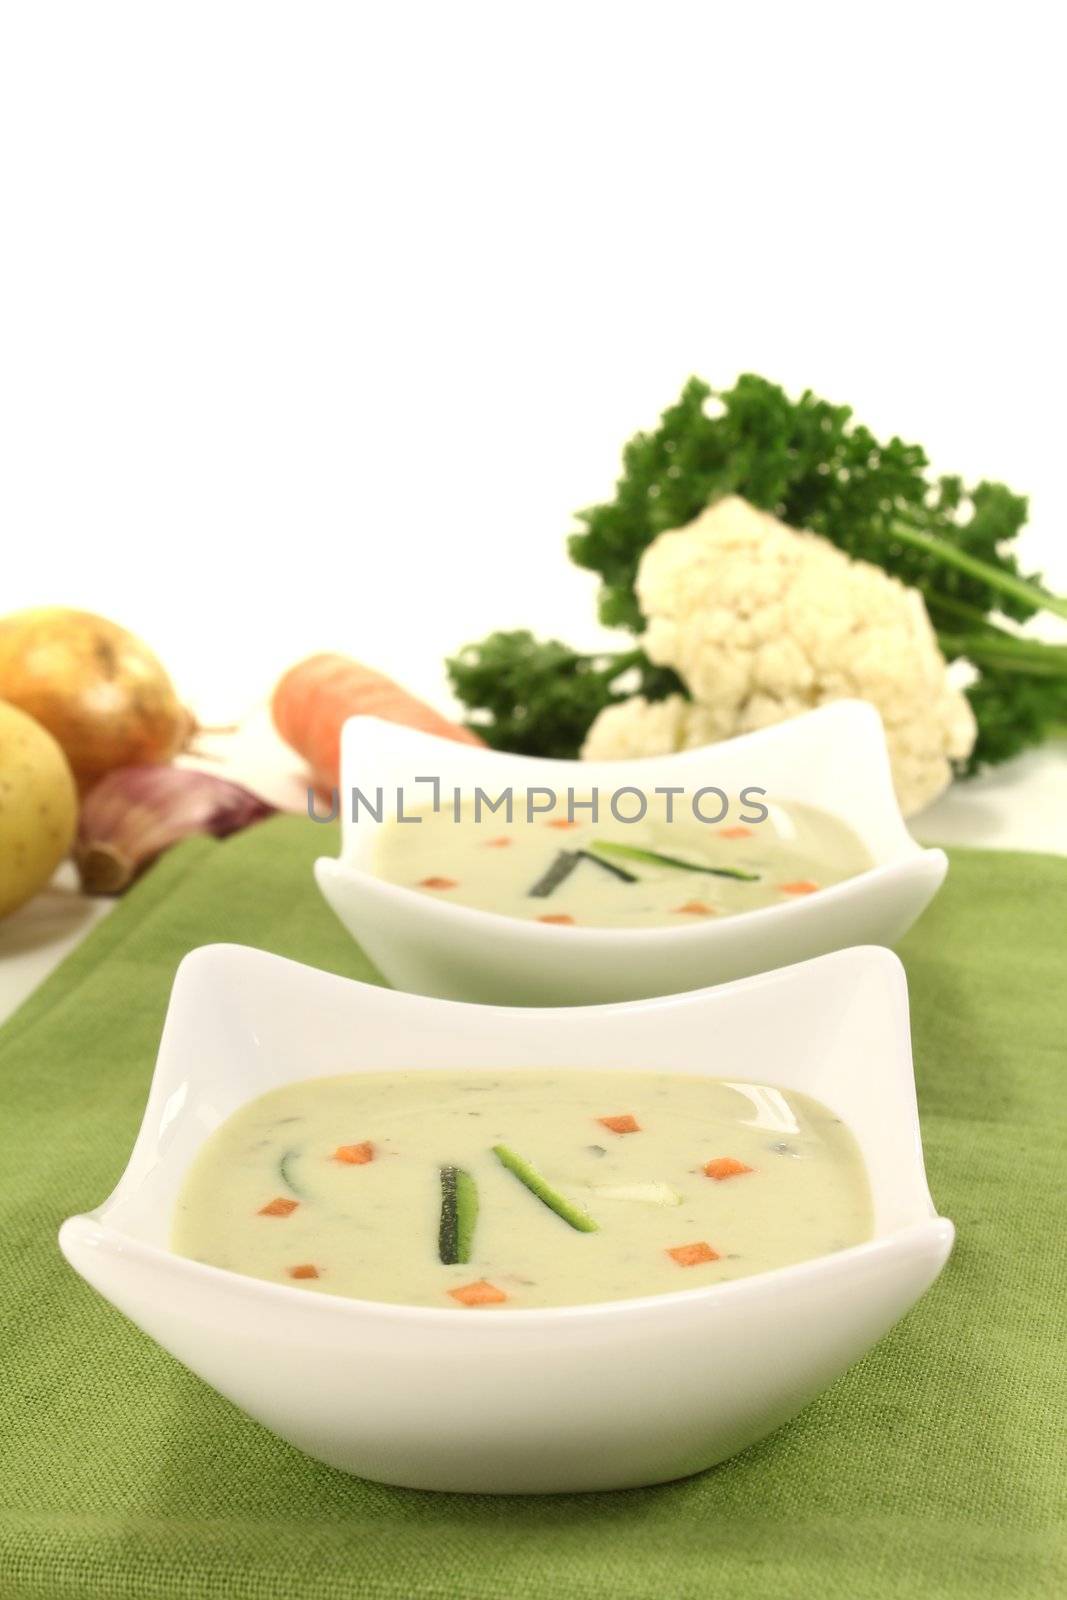 vegetable creme soup with zucchini and carrots on a light background